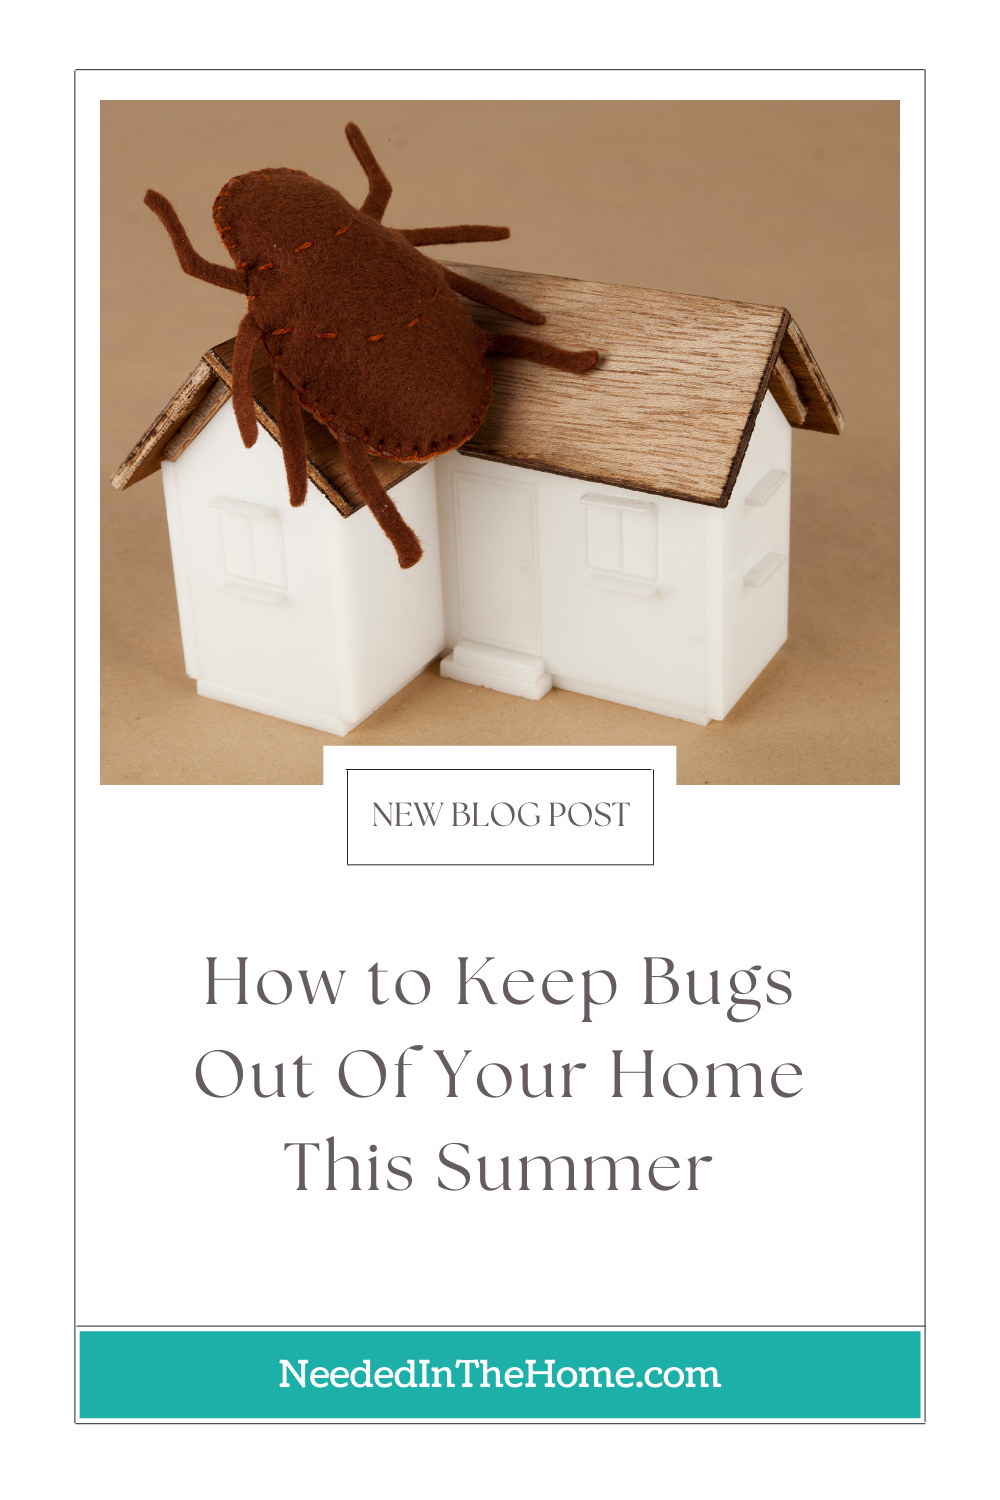 pinterest-pin-description new blog post how to keep bugs out of your home this summer plush bug on toy house neededinthehome